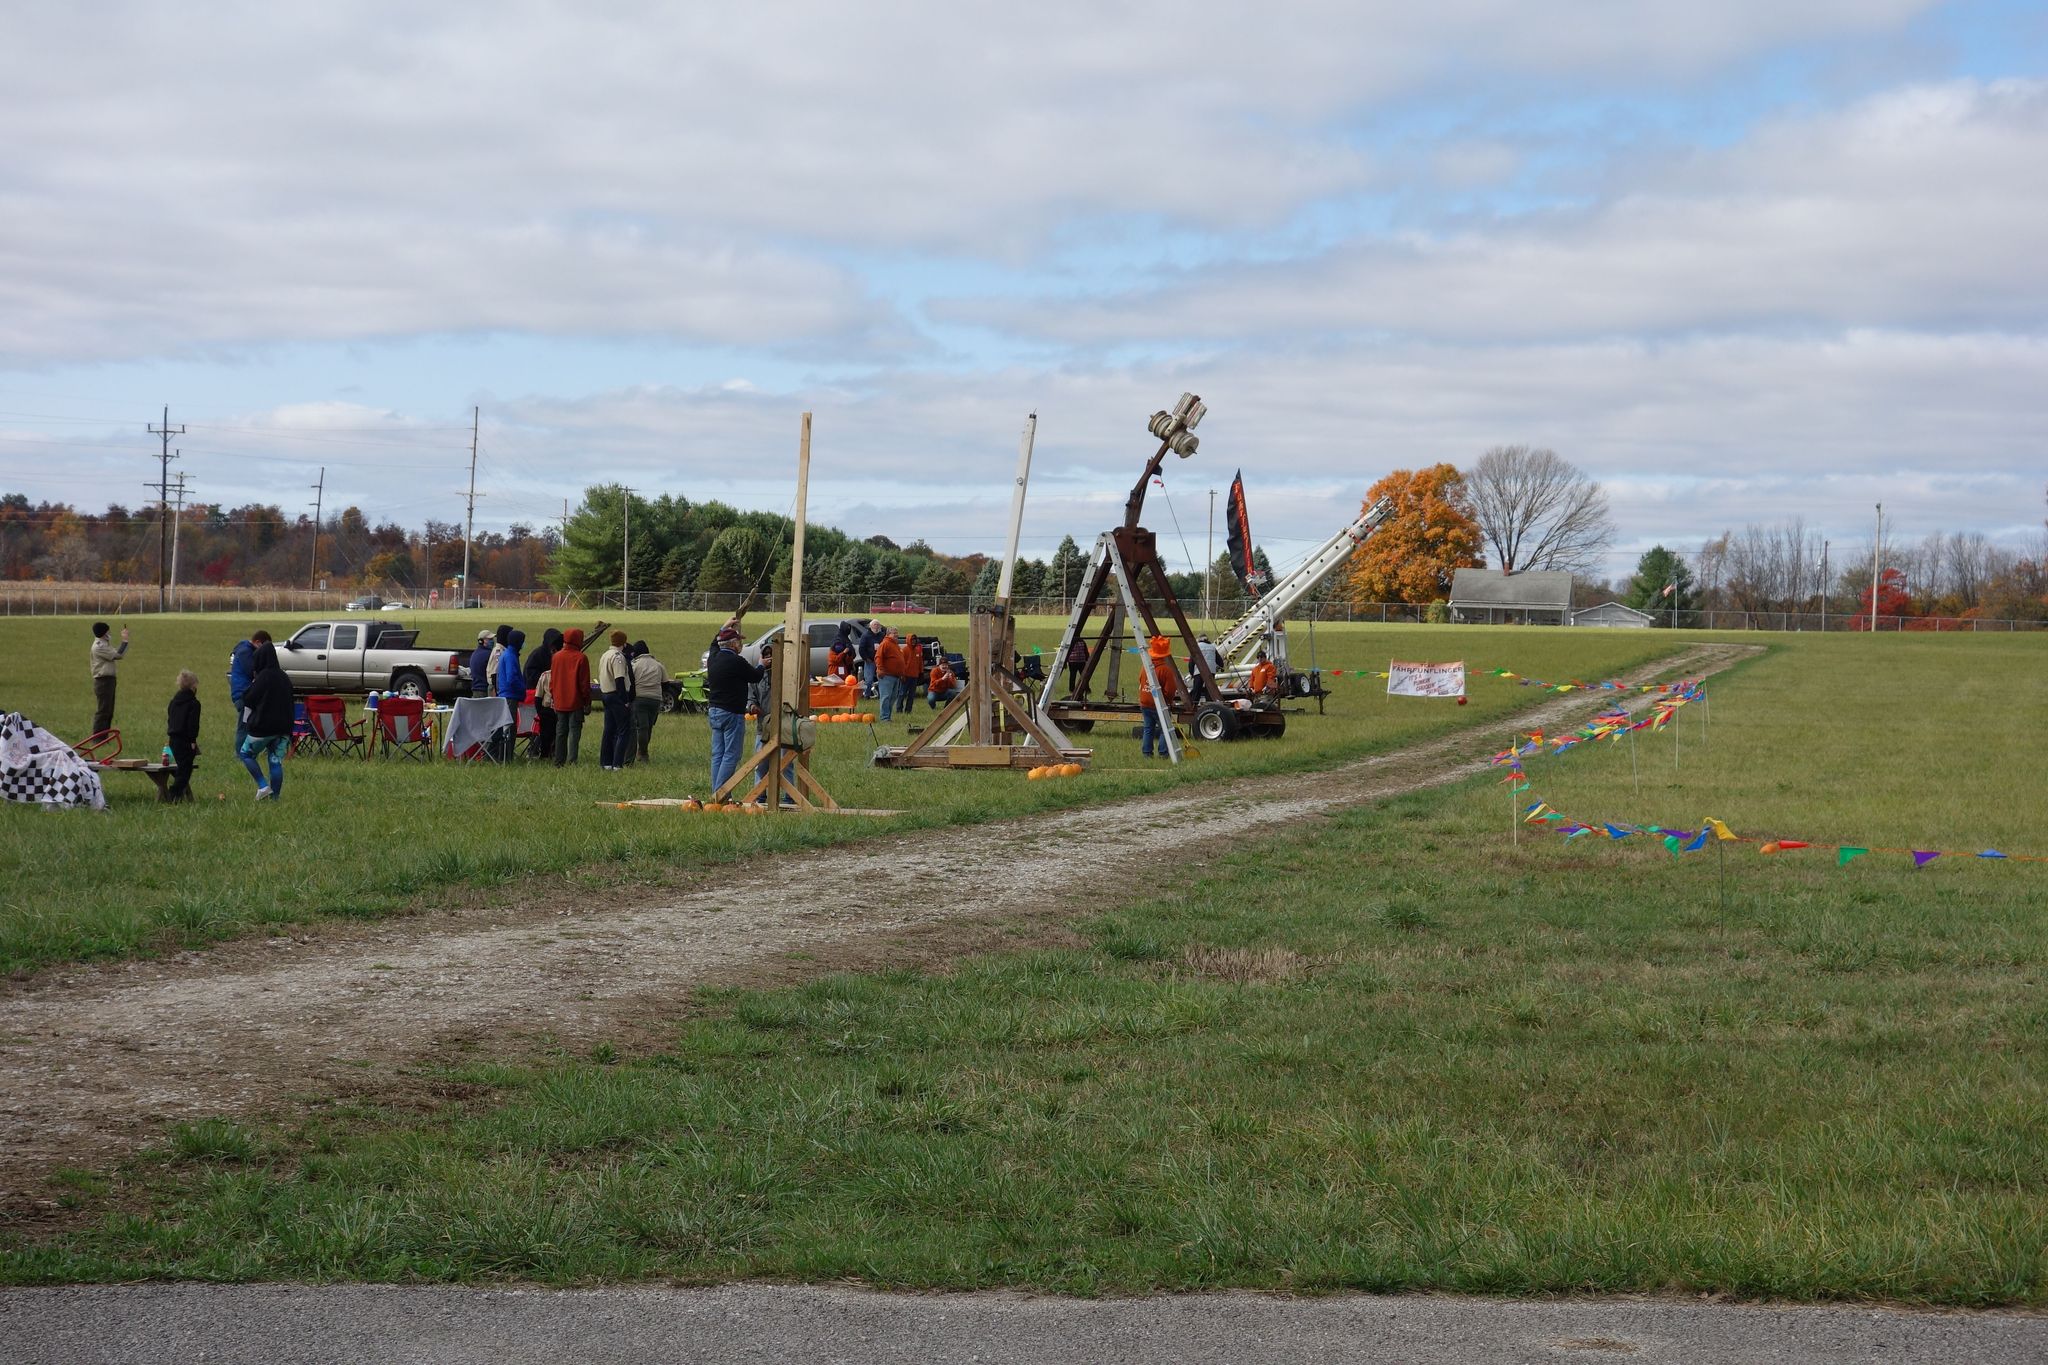 Launch devices set up in a row in field at Monroe County Fairgrounds during 2021 Pumpkin Launch